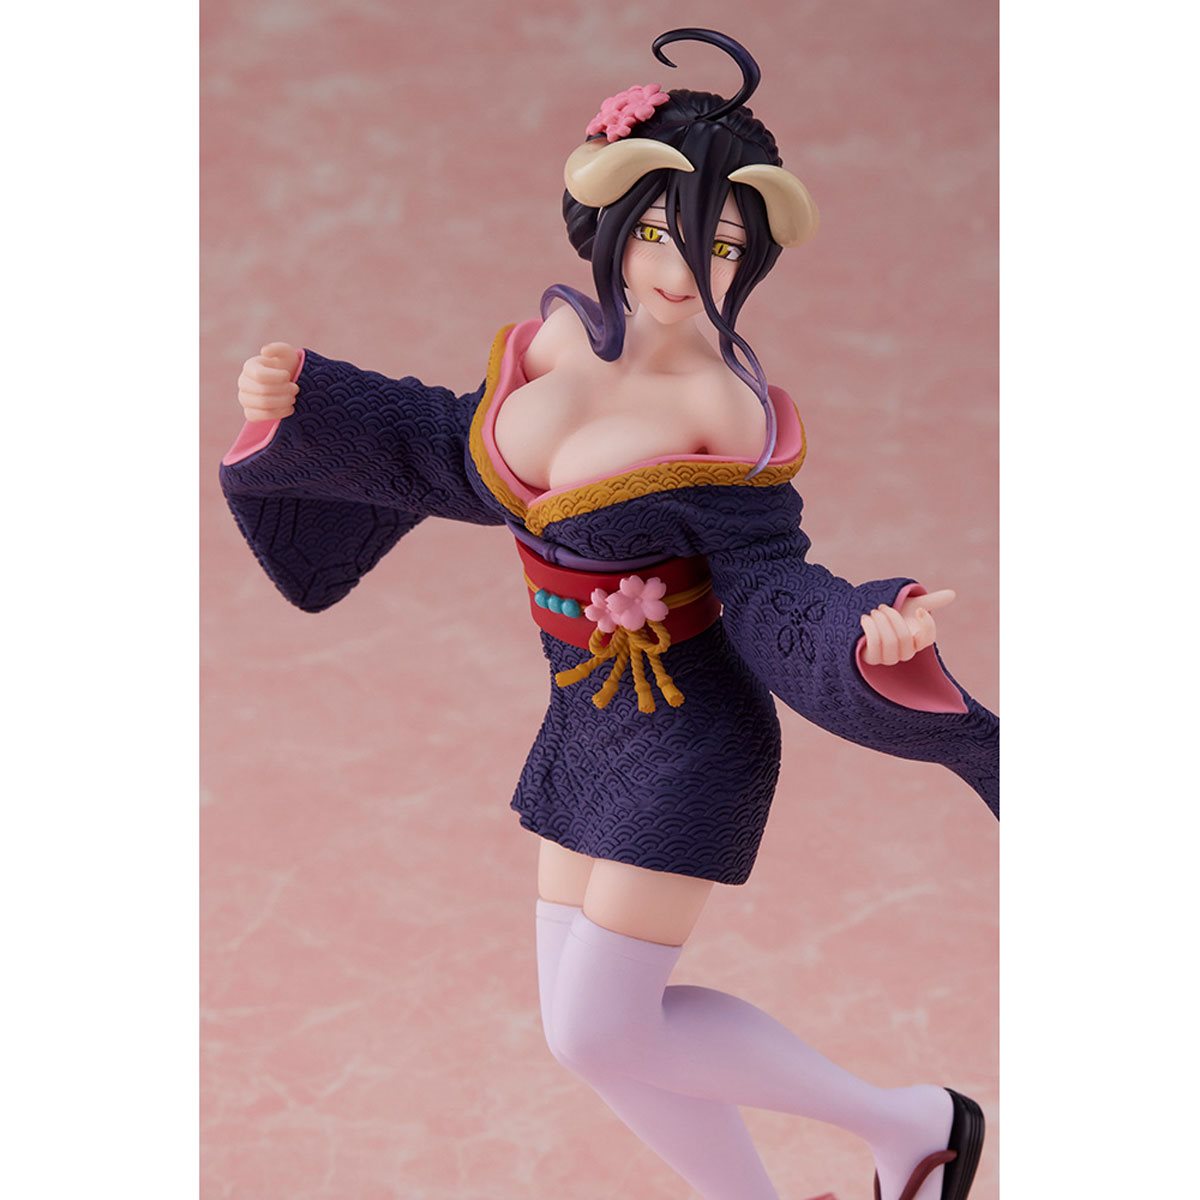 Taito Overlord IV - Albedo (Knit Dress Ver.) Coreful Figure For Discount 